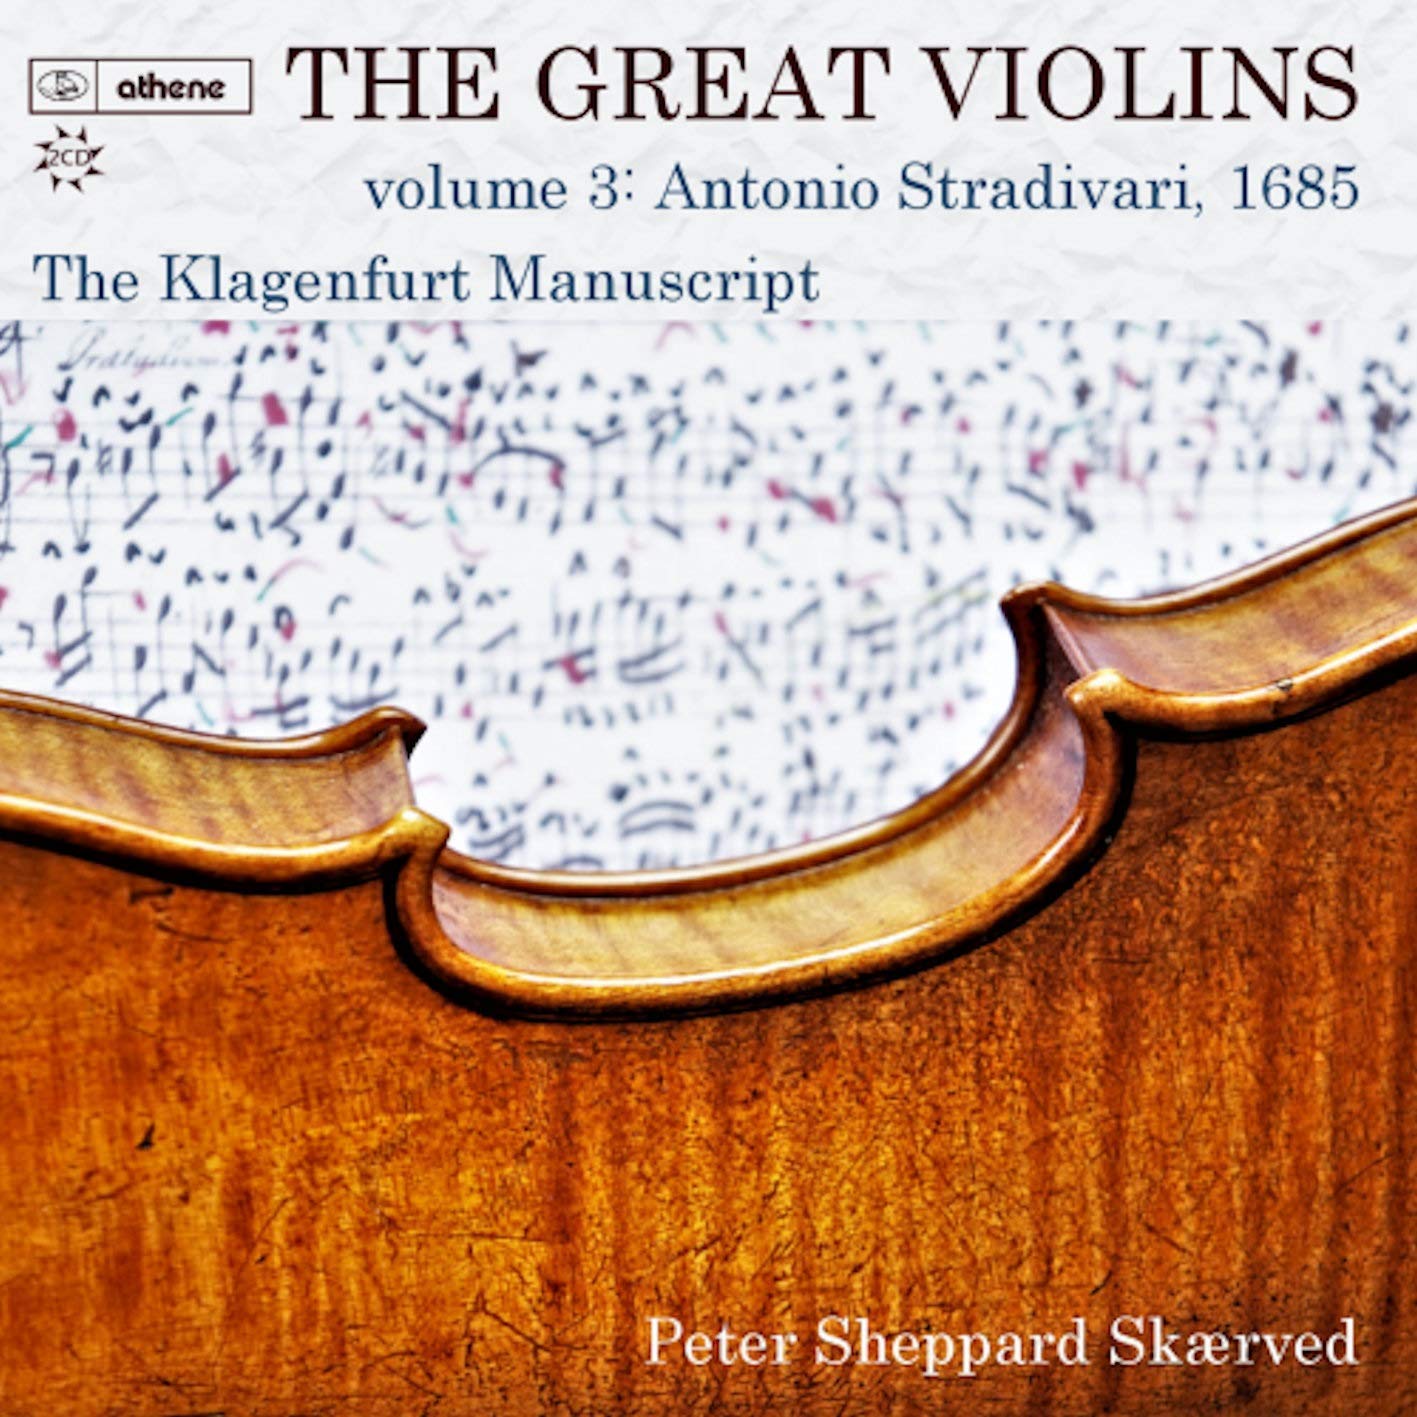 Cover of The Great Violins vol. 3